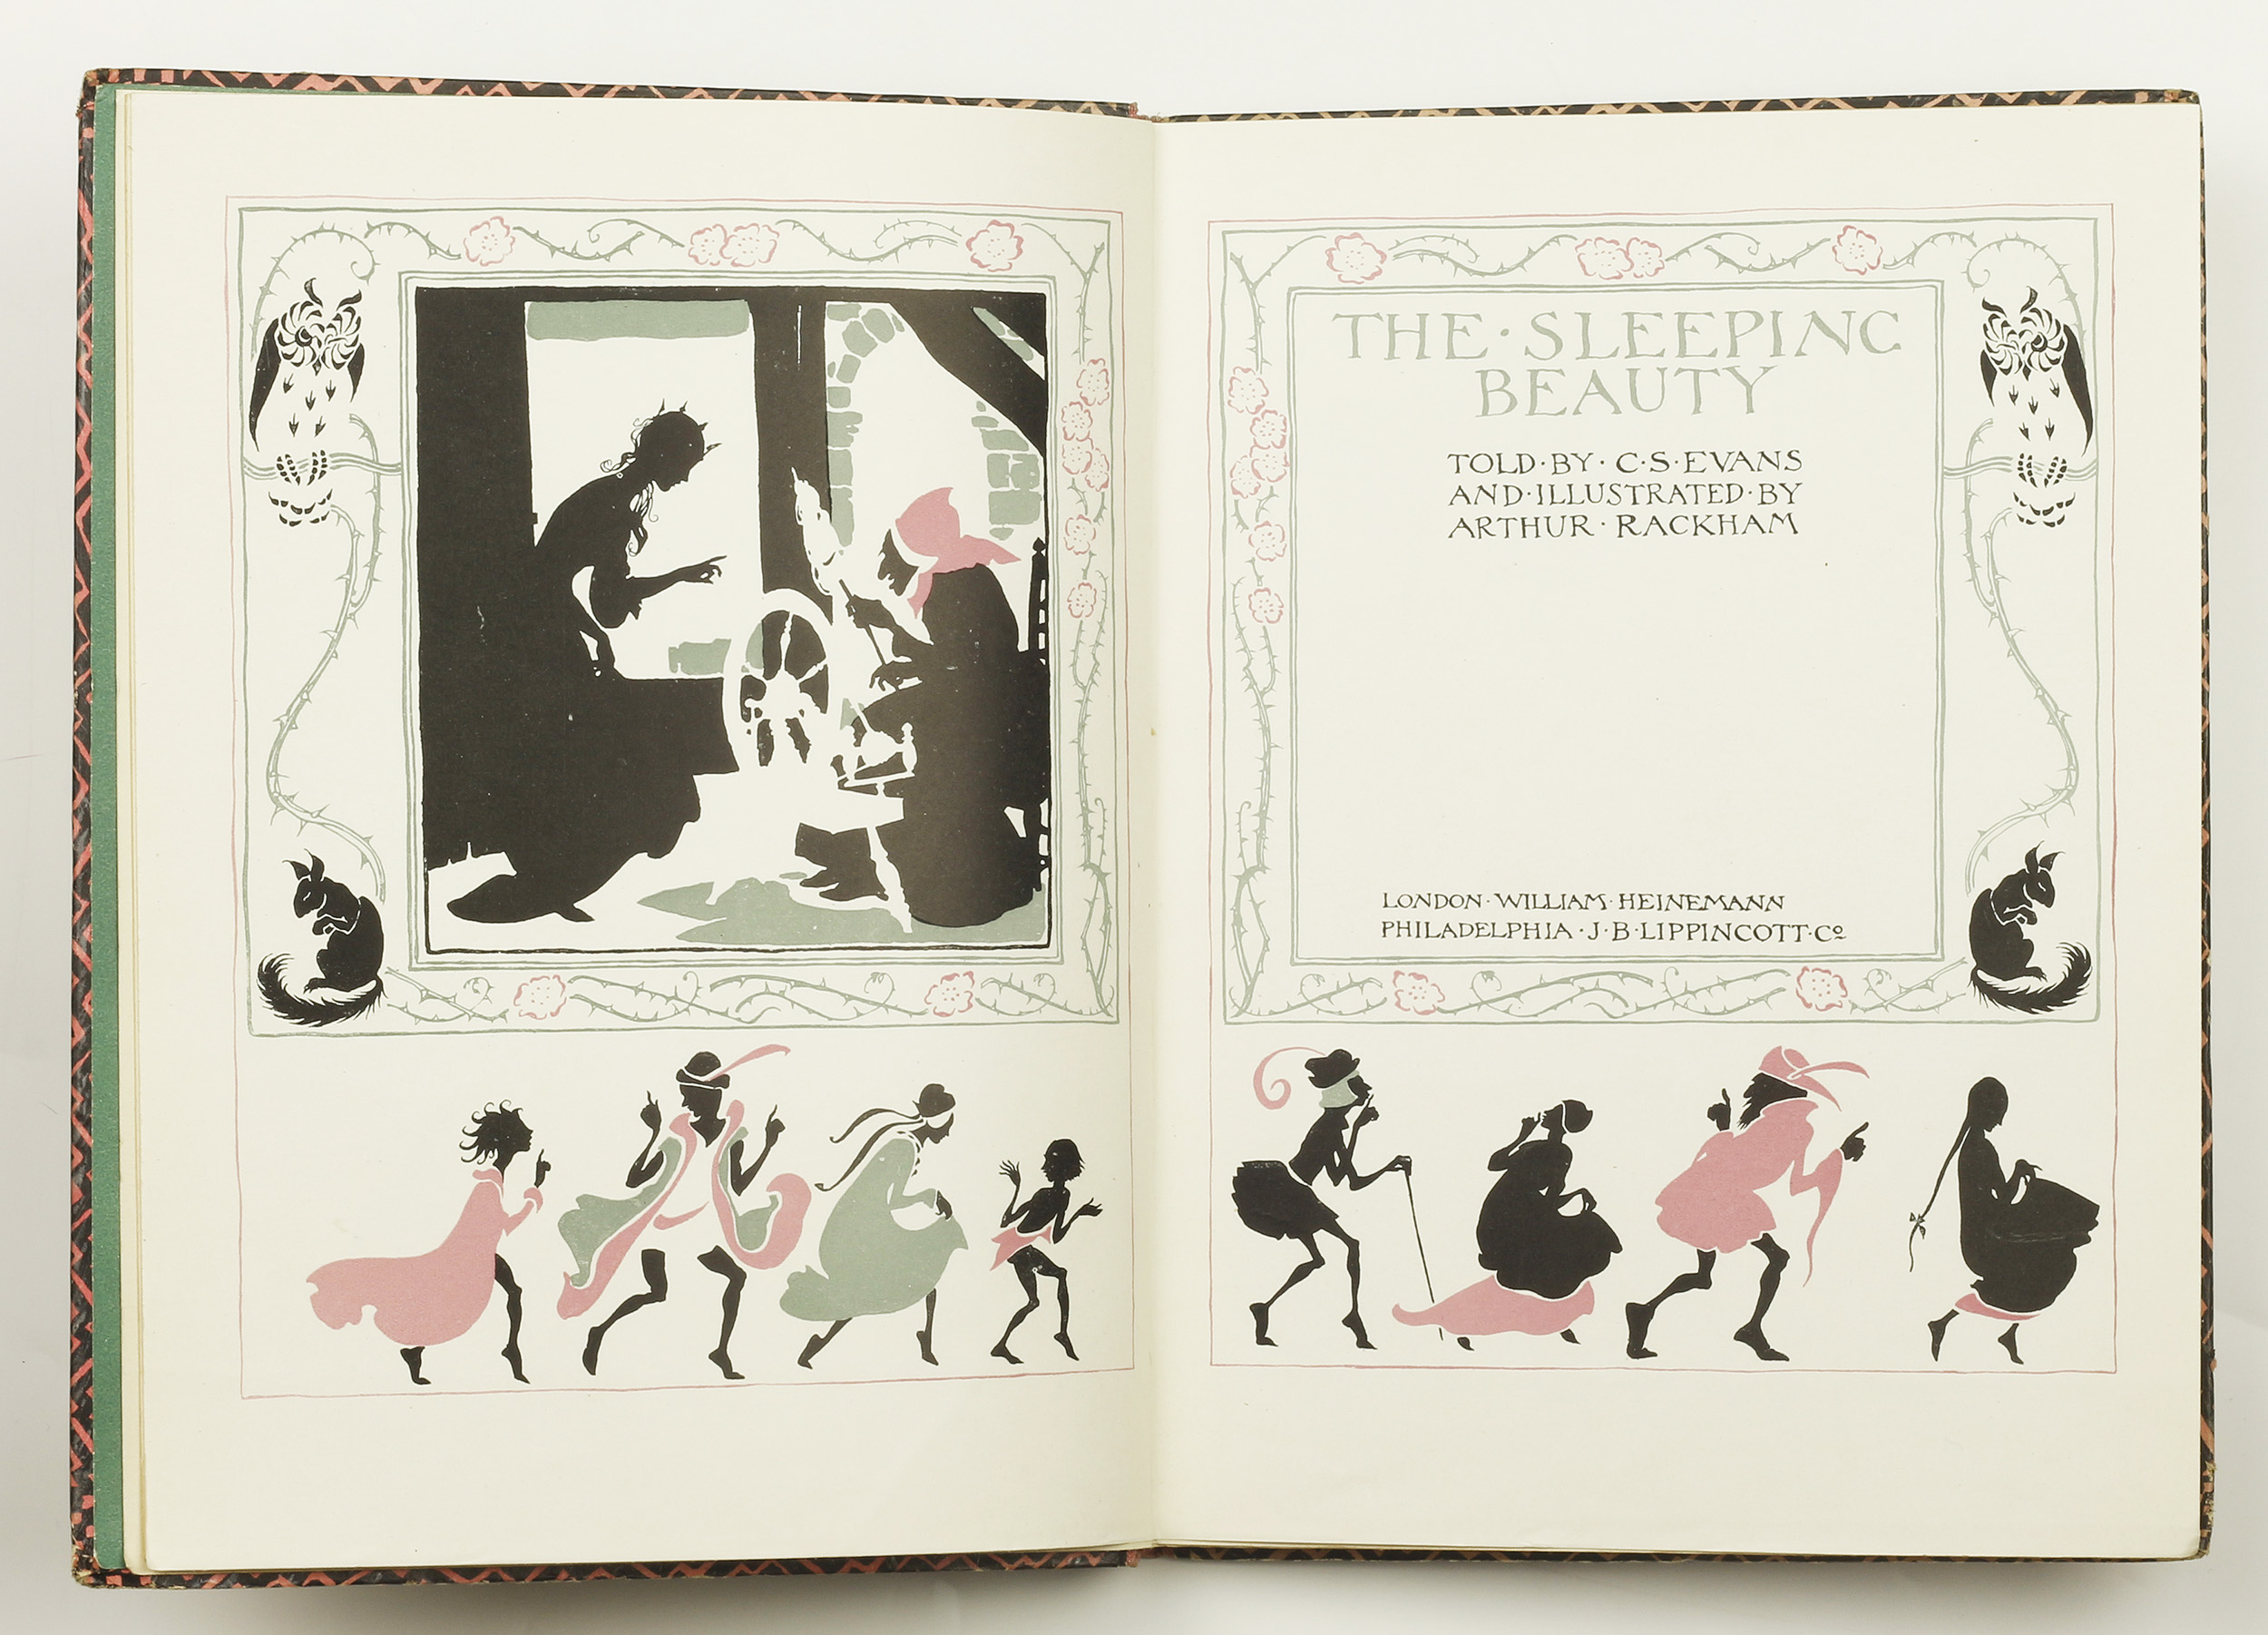 The Sleeping Beauty by C.S. Evans